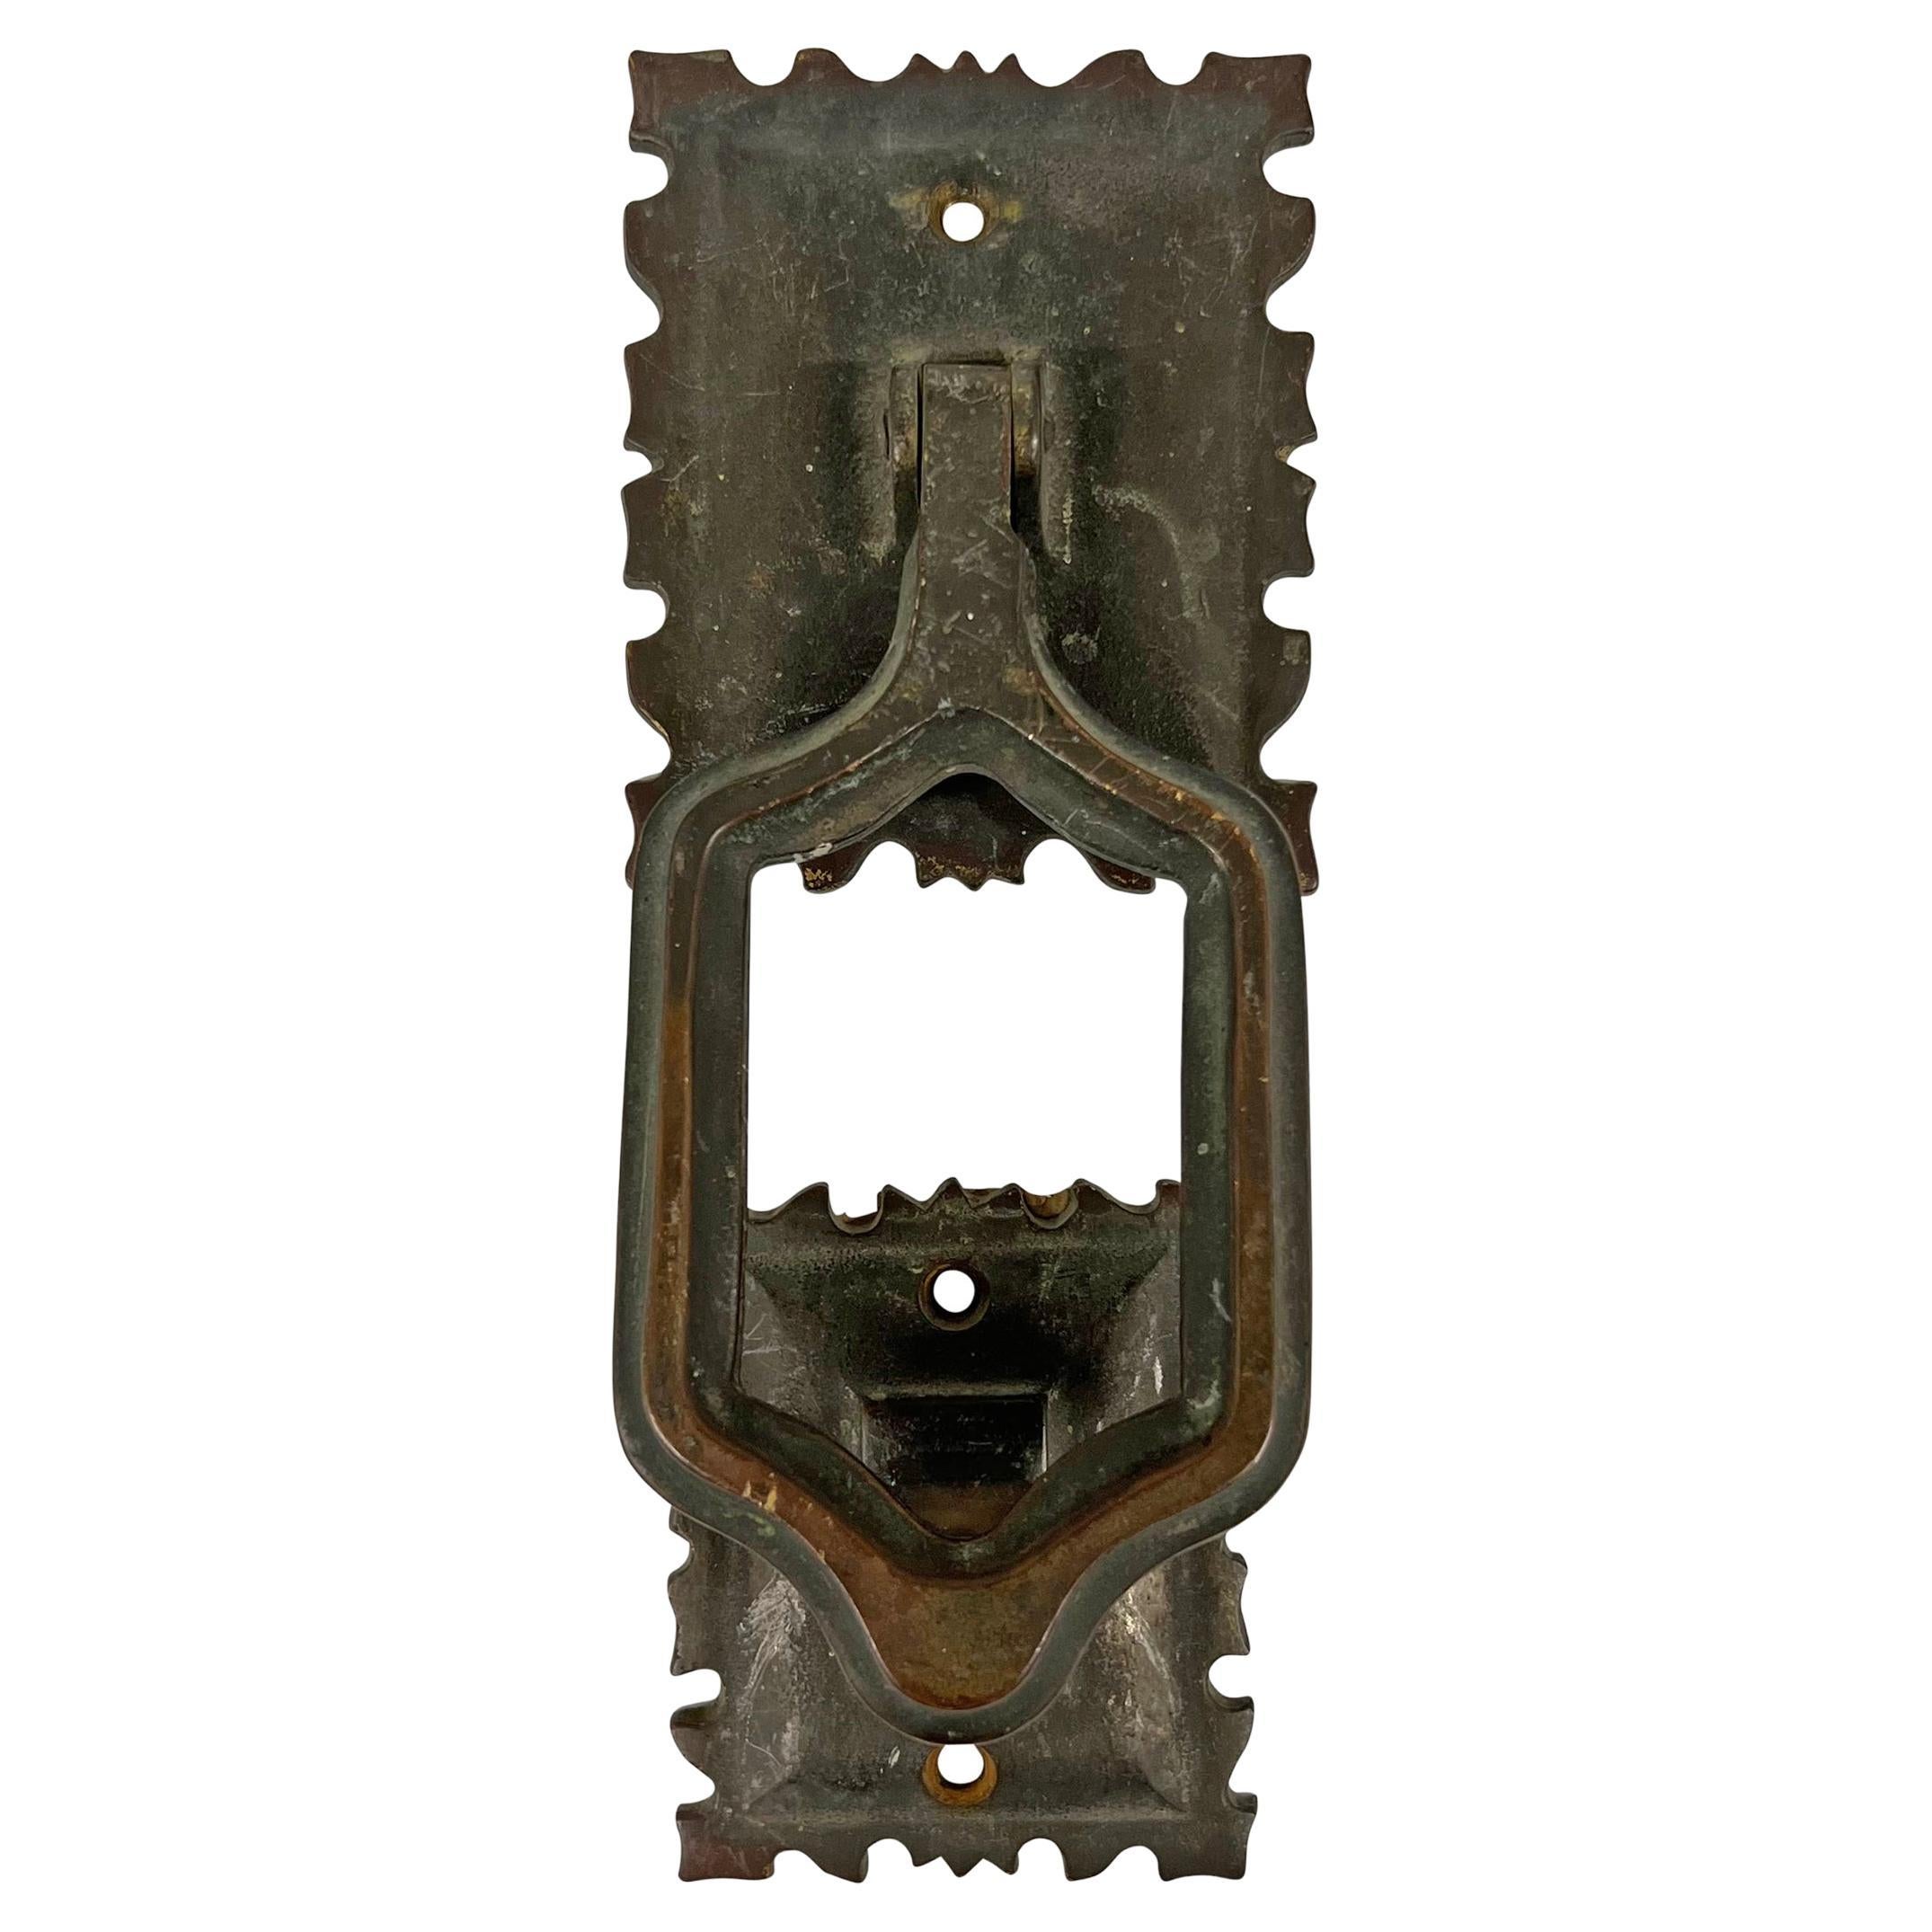 Early 20th Century American Arts and Crafts Doorknocker